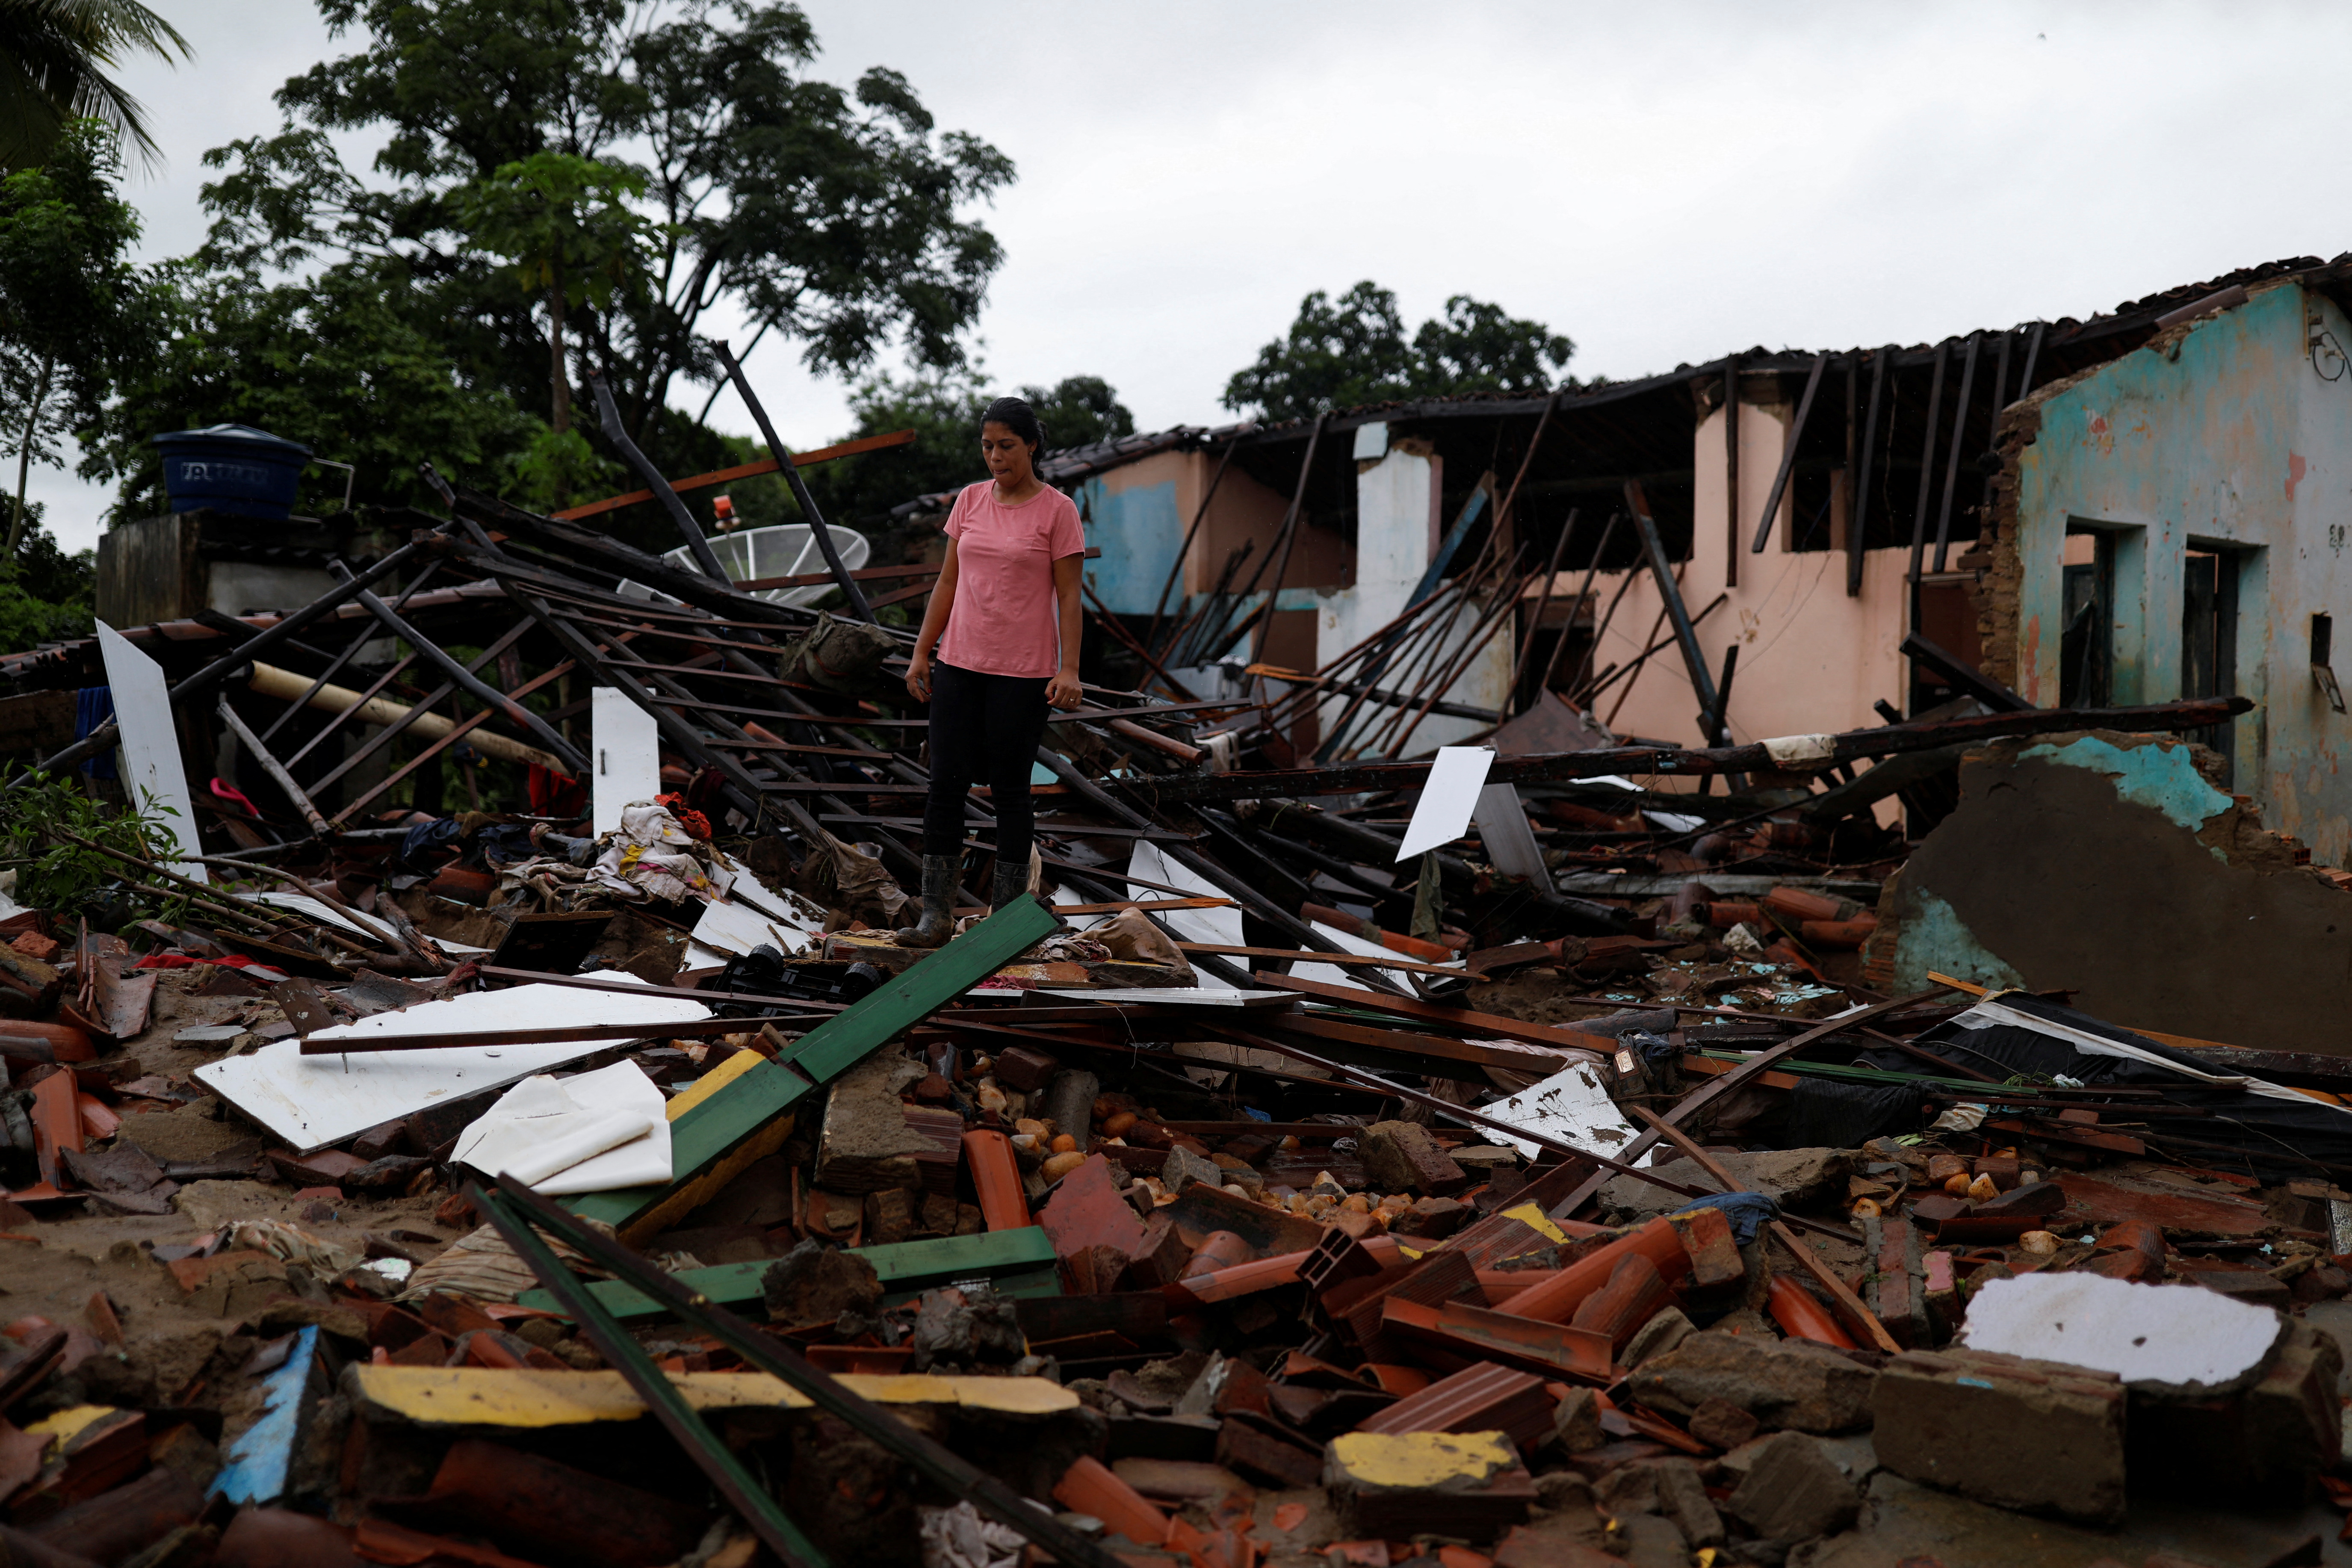 Juliana Reis, 37, stands near the rubble of her home which was destroyed by floods in Itambe, Bahia state, Brazil December 28, 2021. REUTERS/Amanda Perobelli